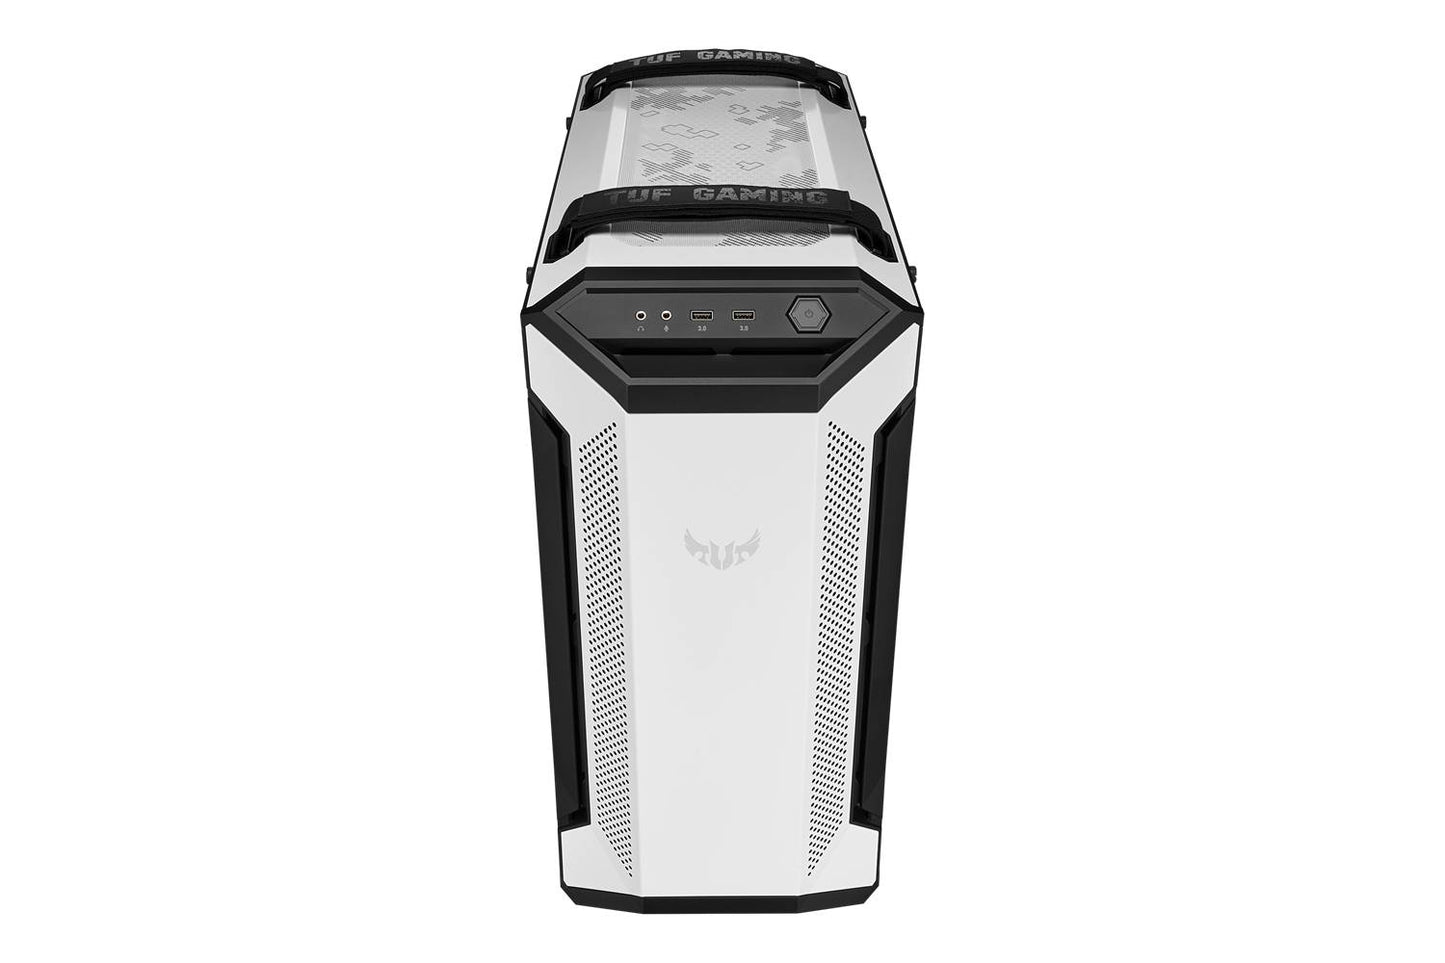 Asus Tuf Gaming GT501 Cabinet - White-Cabinet-ASUS-computerspace